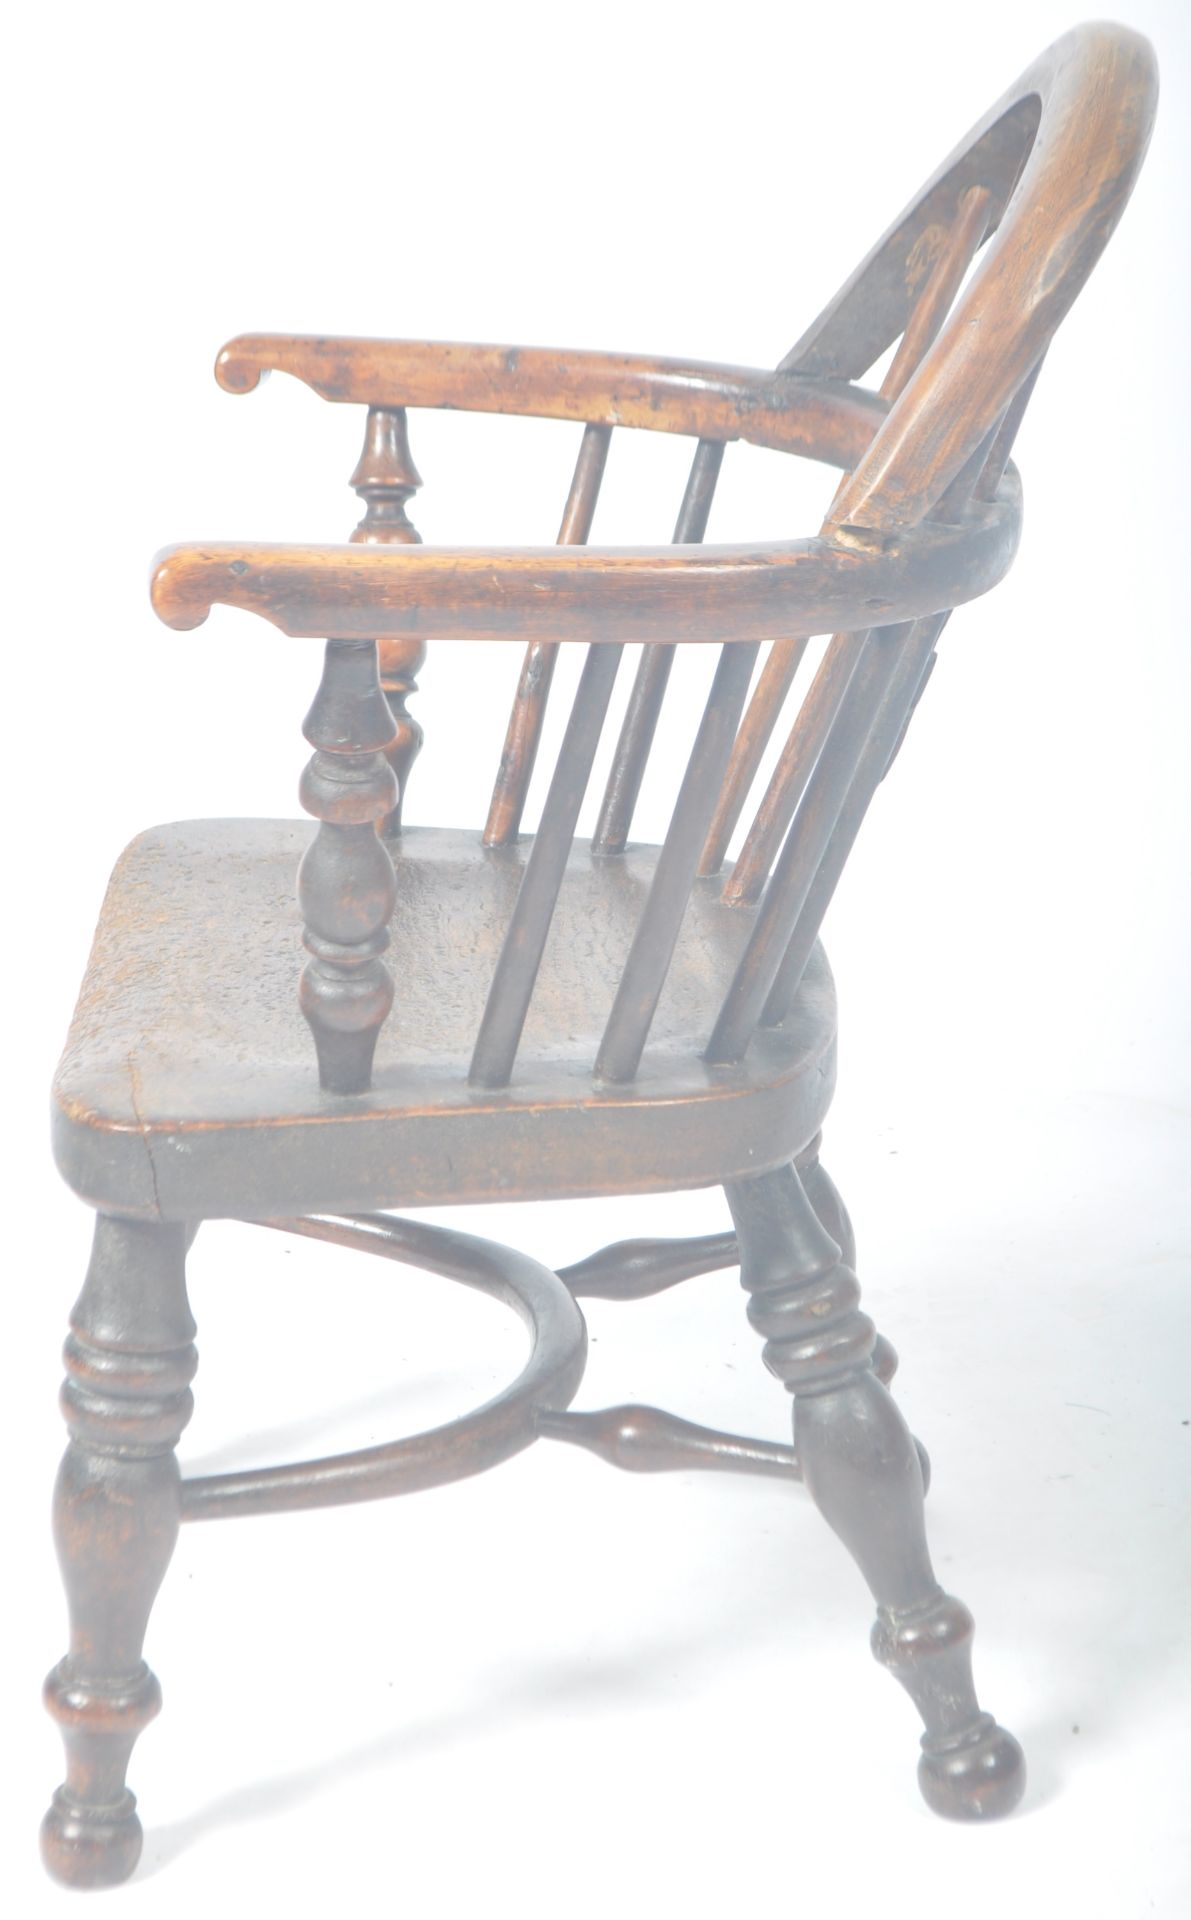 RARE ANTIQUE COUNTRY HOUSE YEW AND ELM CHILDS WINDSOR CHAIR - Image 8 of 8